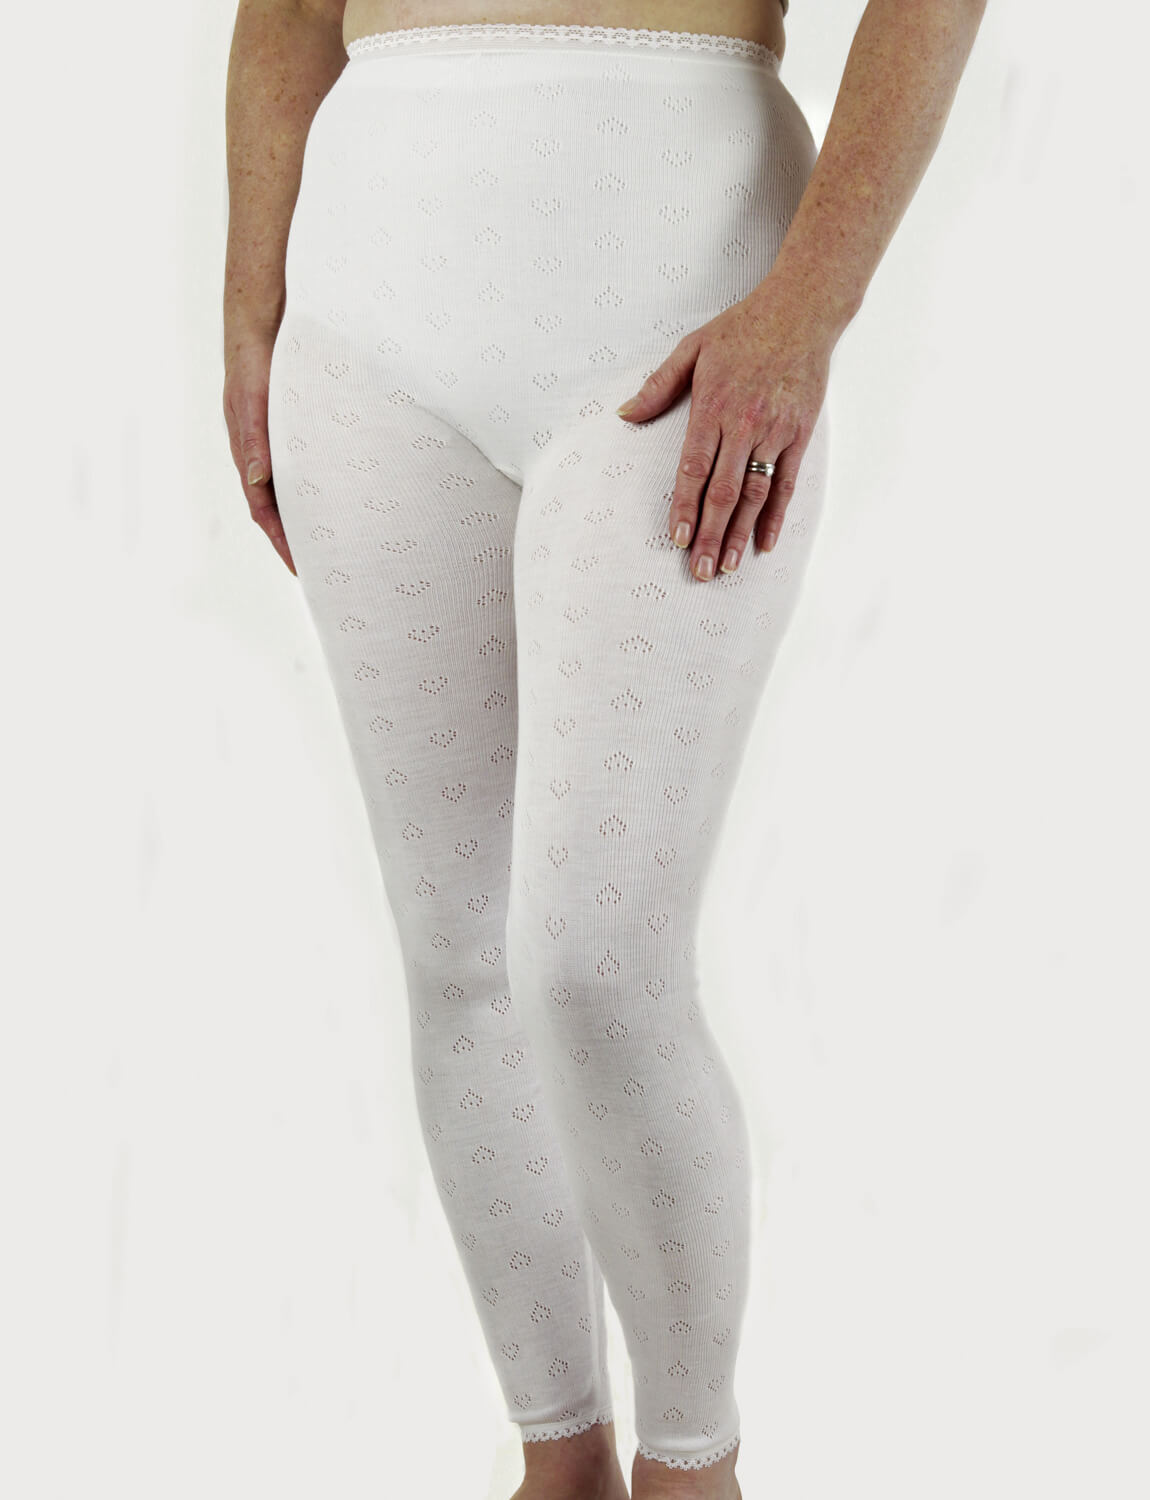 Long Johns, Brushed Thermal Underwear for Women